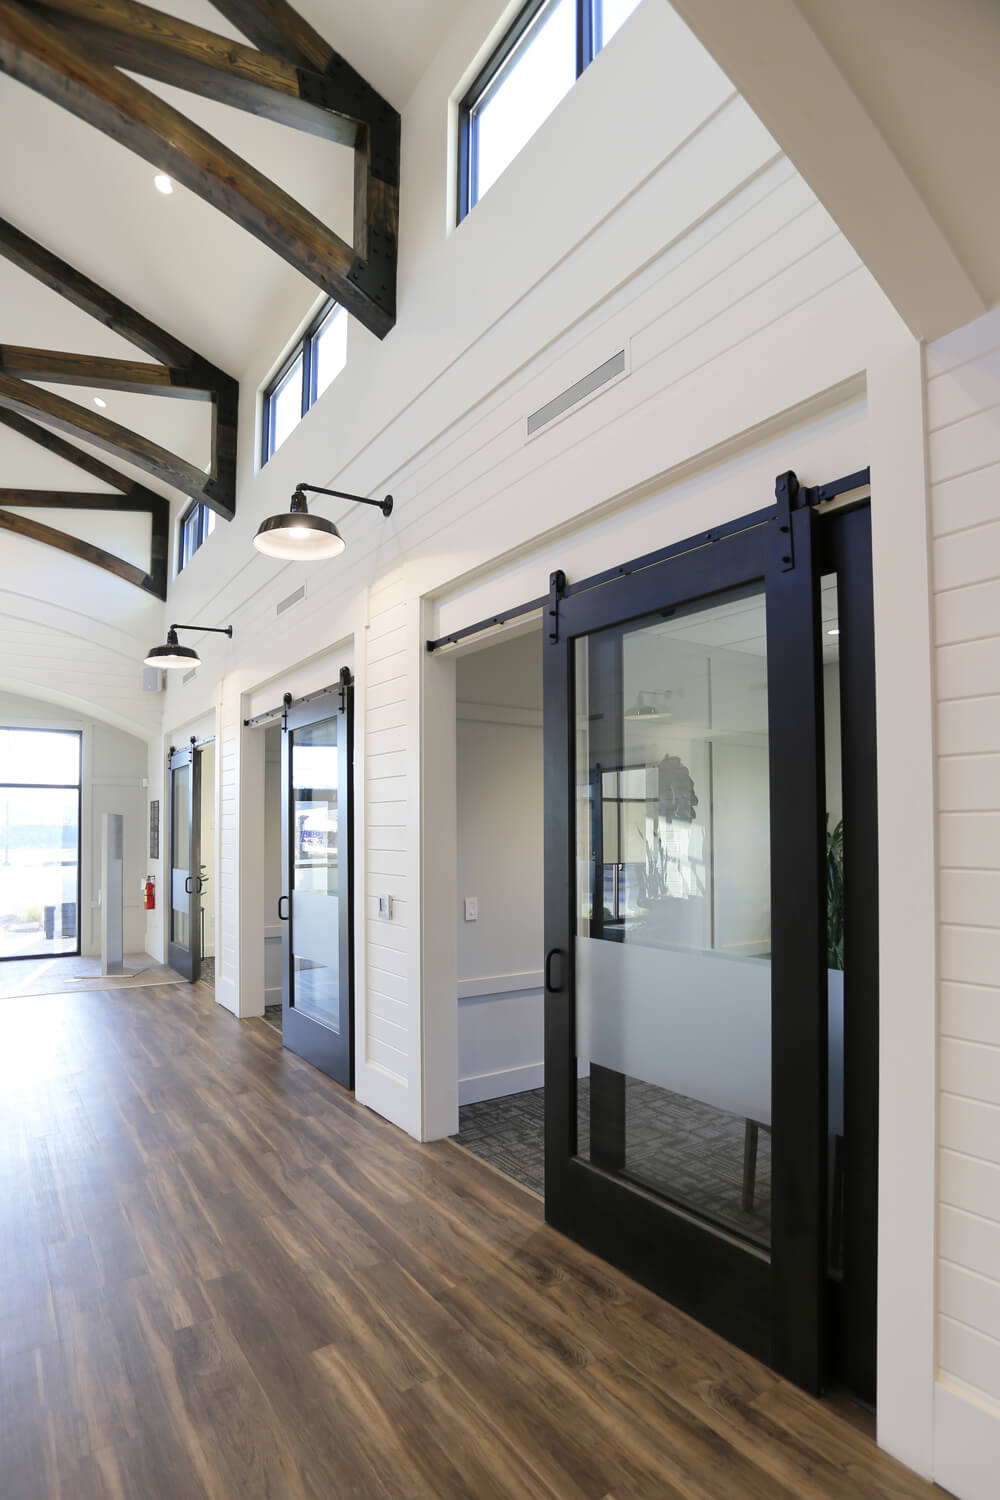 Guardian Credit Union - Wetumpka - Sliding Office Doors - Designed by Foshee Architecture